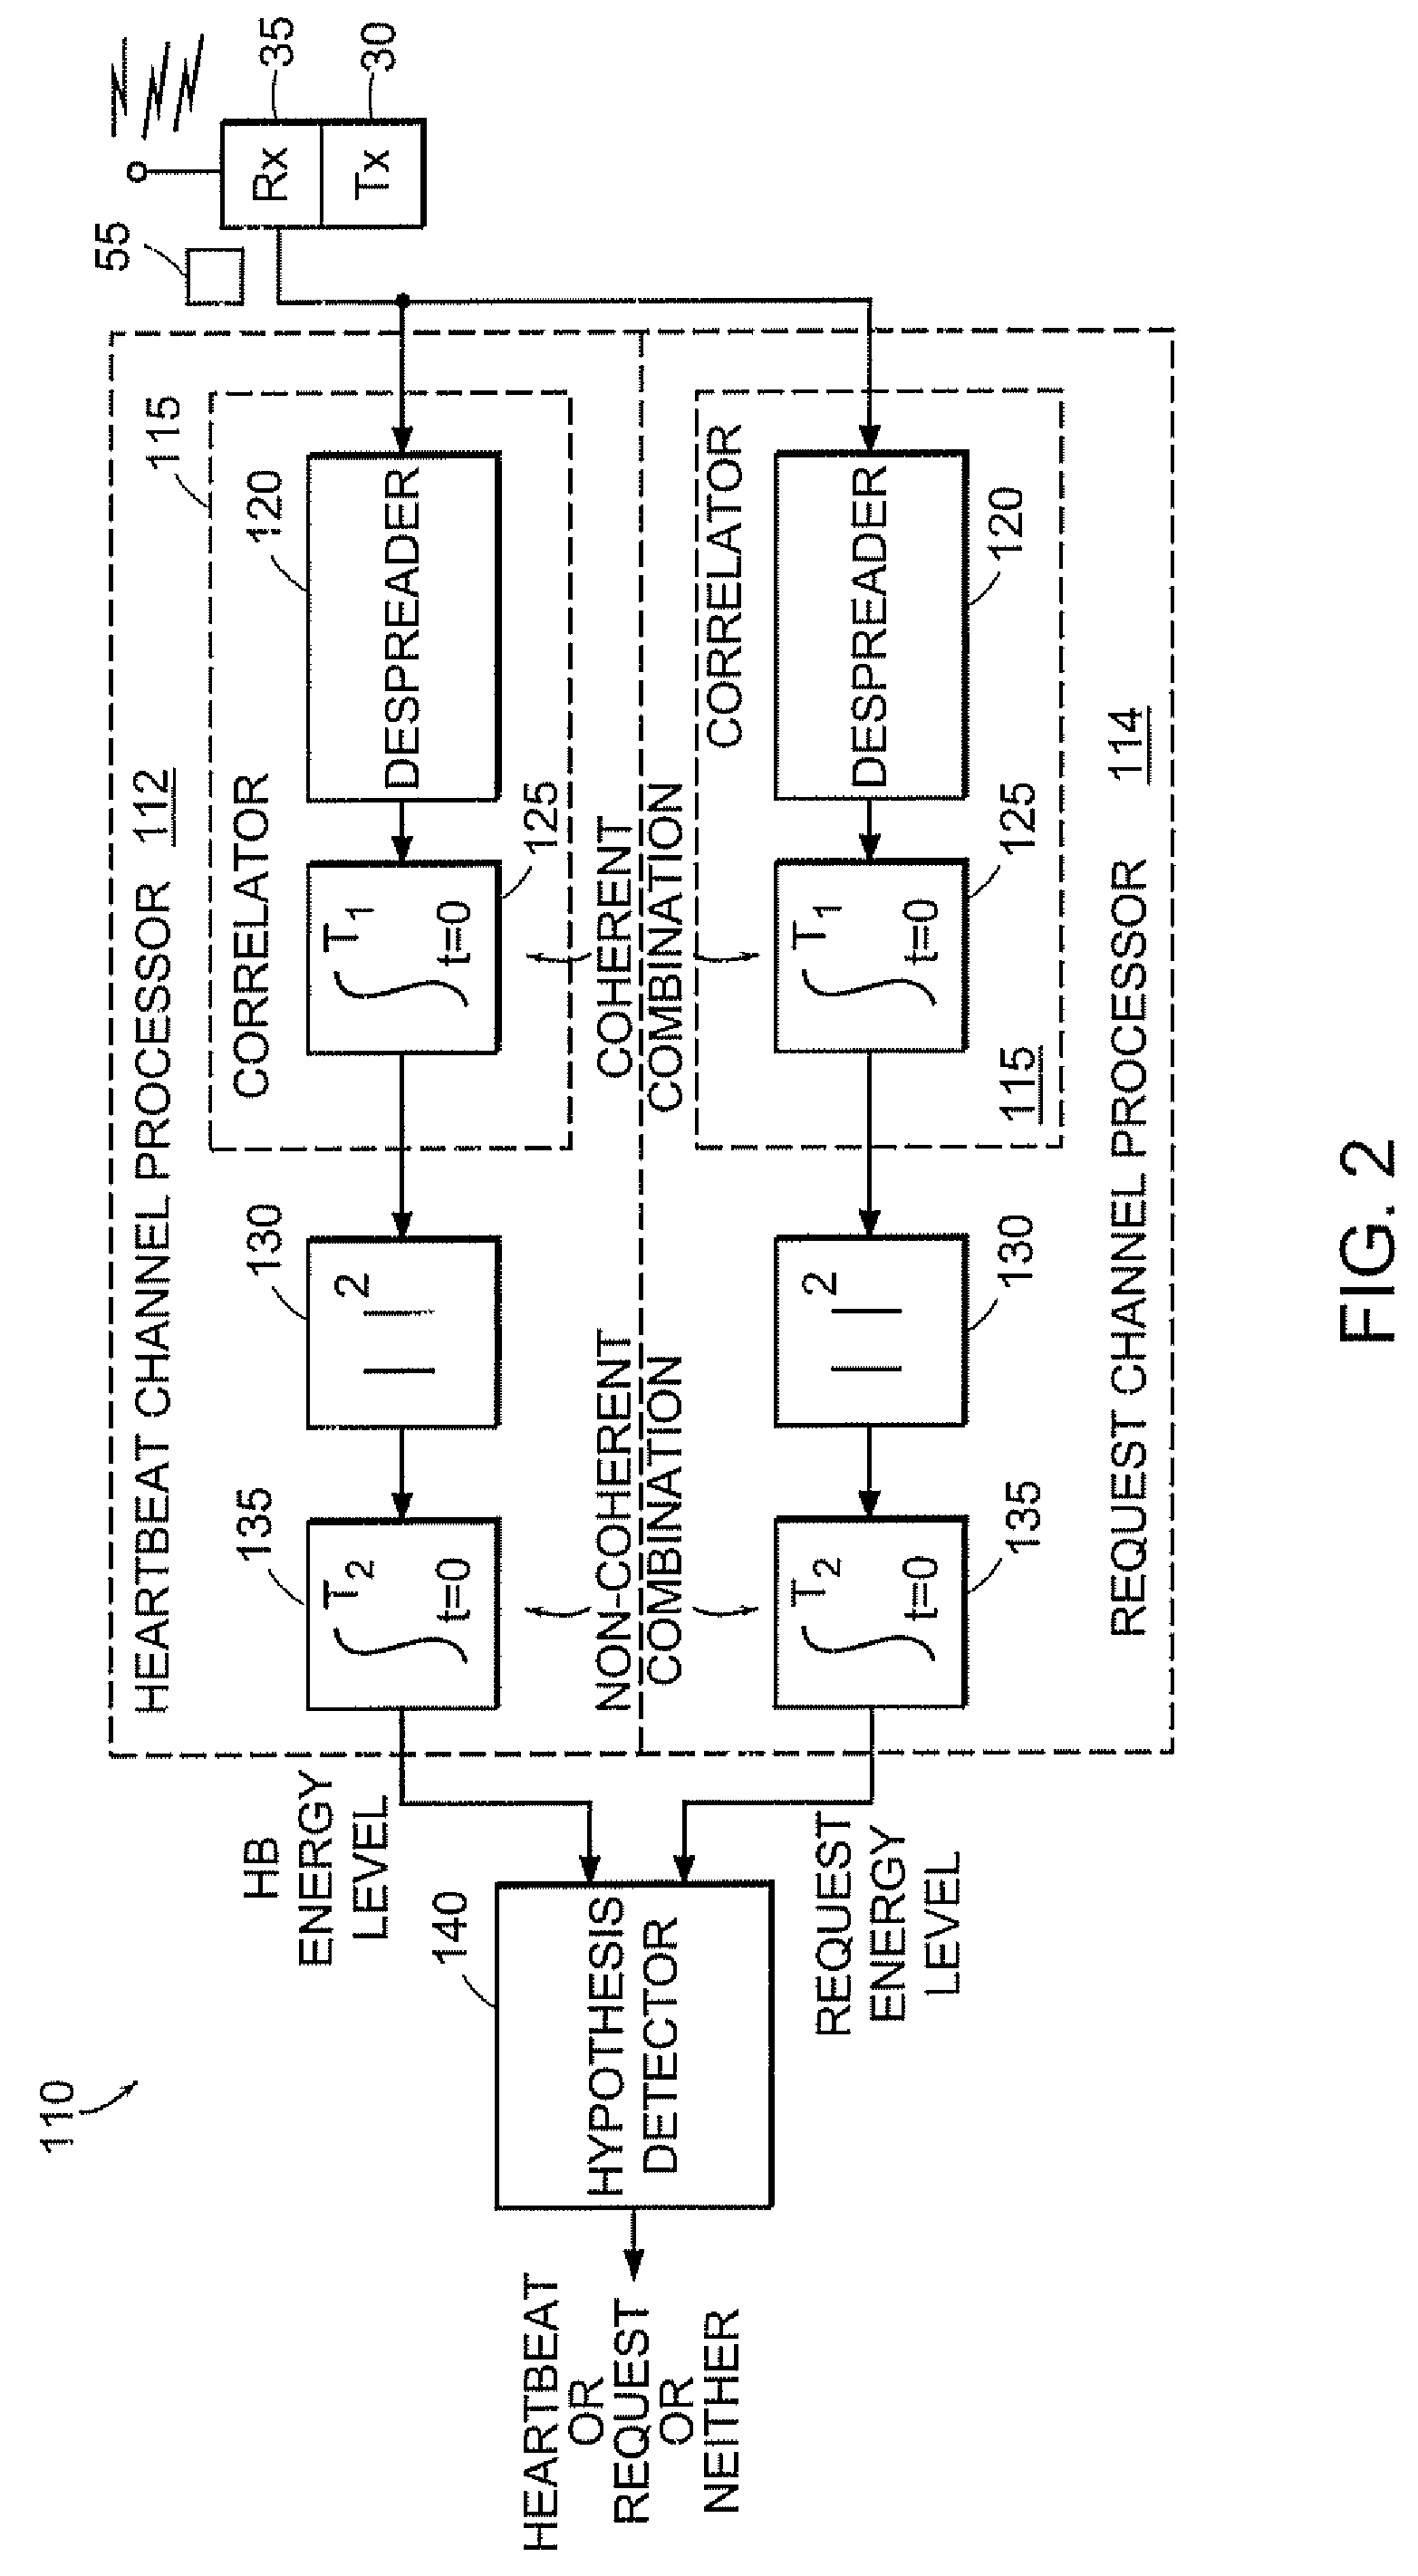 Transmittal of heartbeat signal at a lower level than heartbeat request